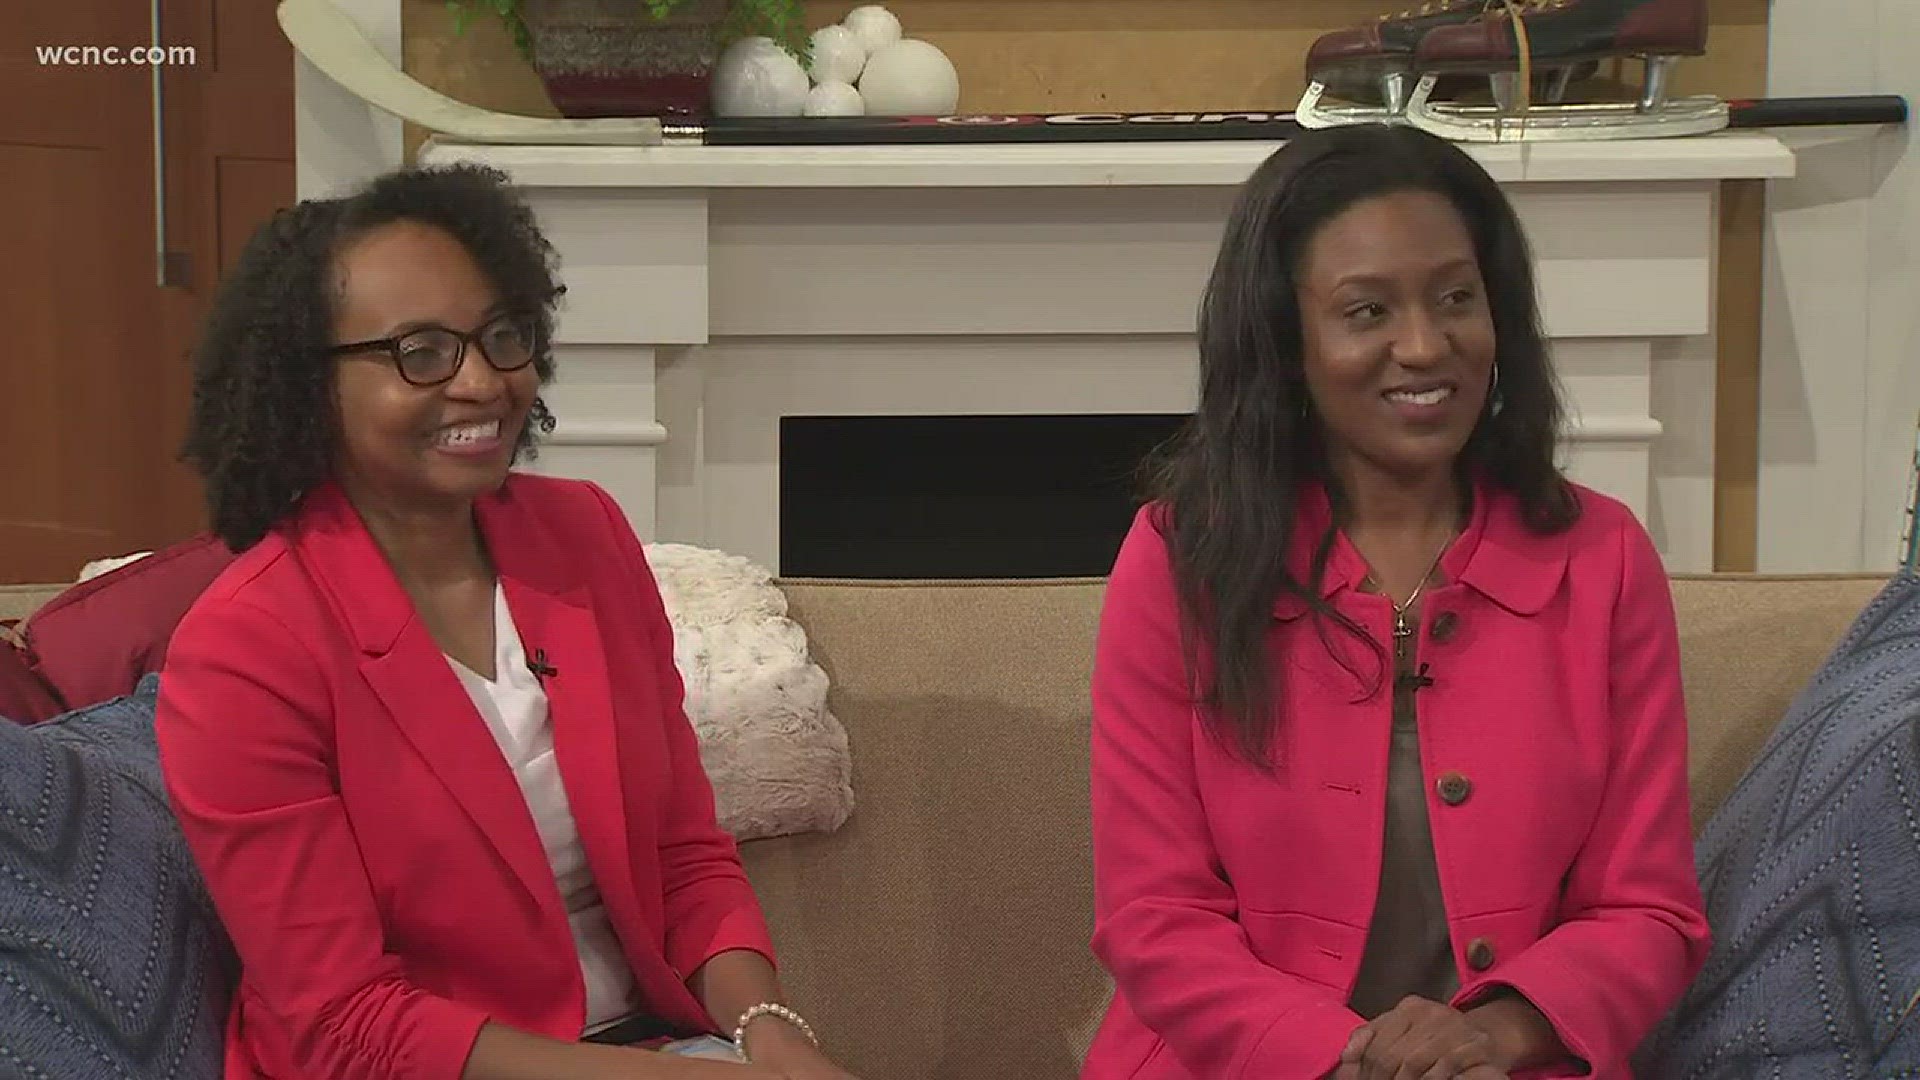 Shimah Easter and Kimberly Dixon  tell us about the Lit. For the Culture event